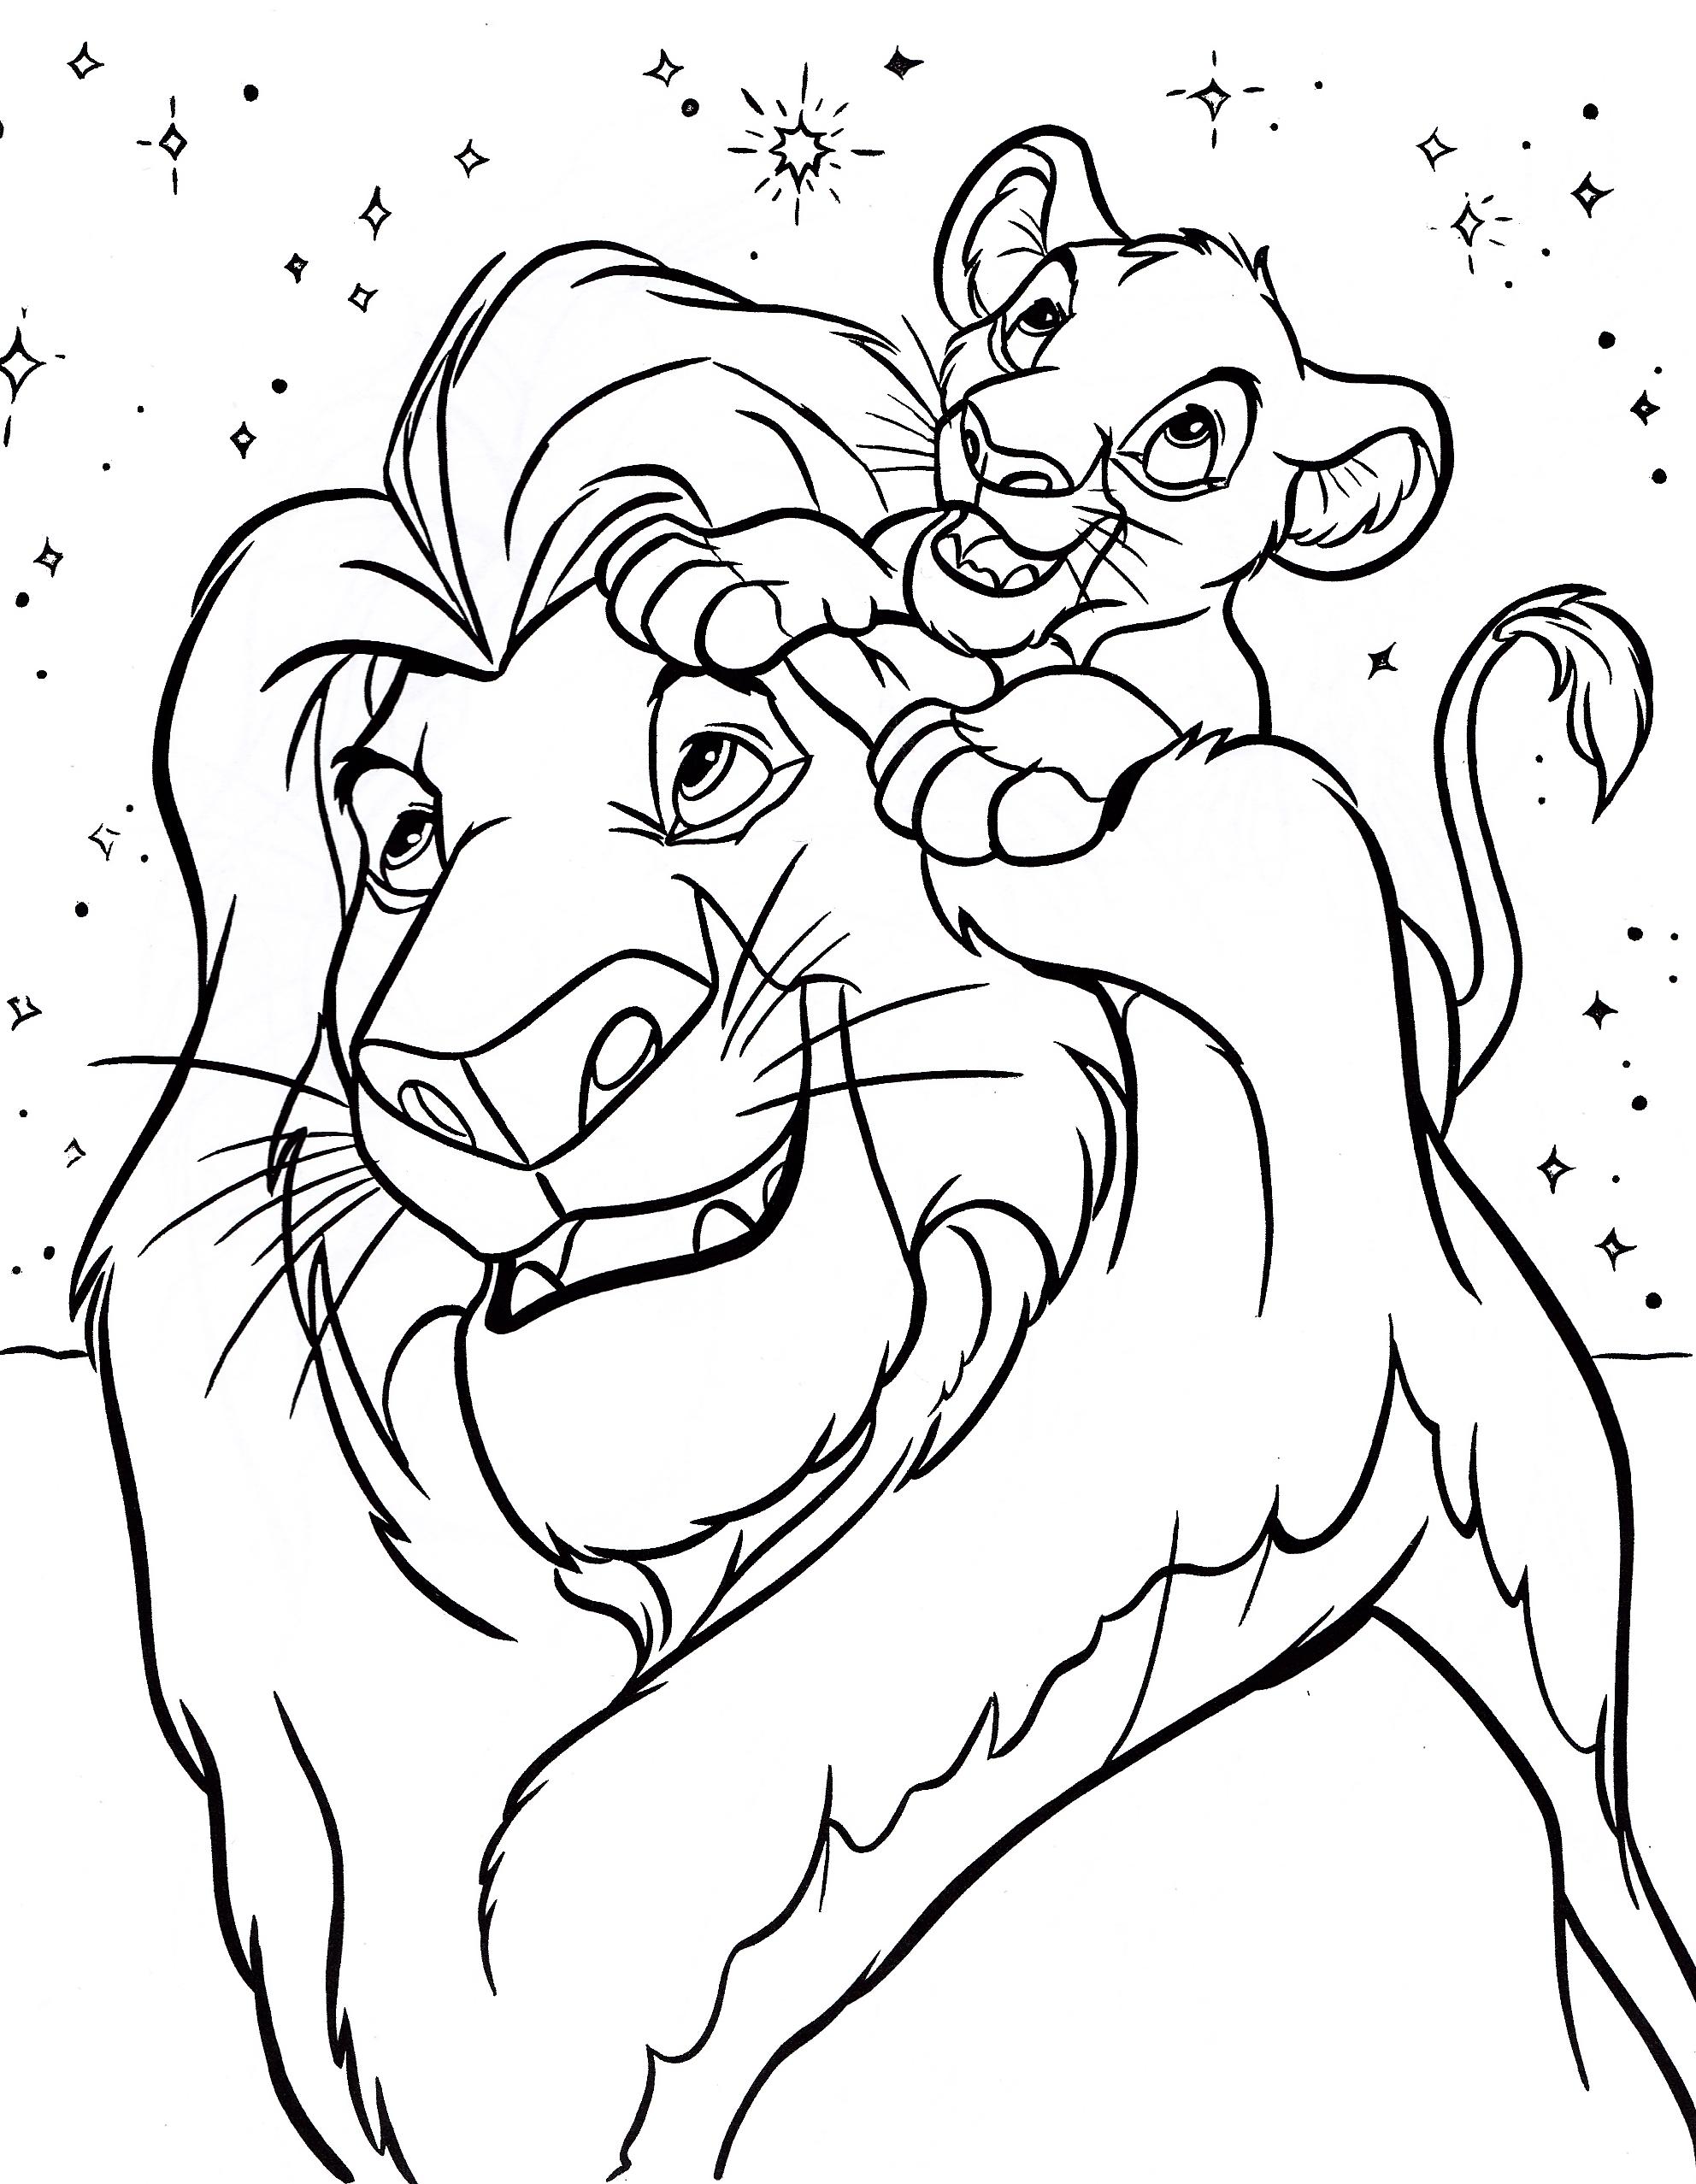 Coloring Pages Disney - Coloring pages